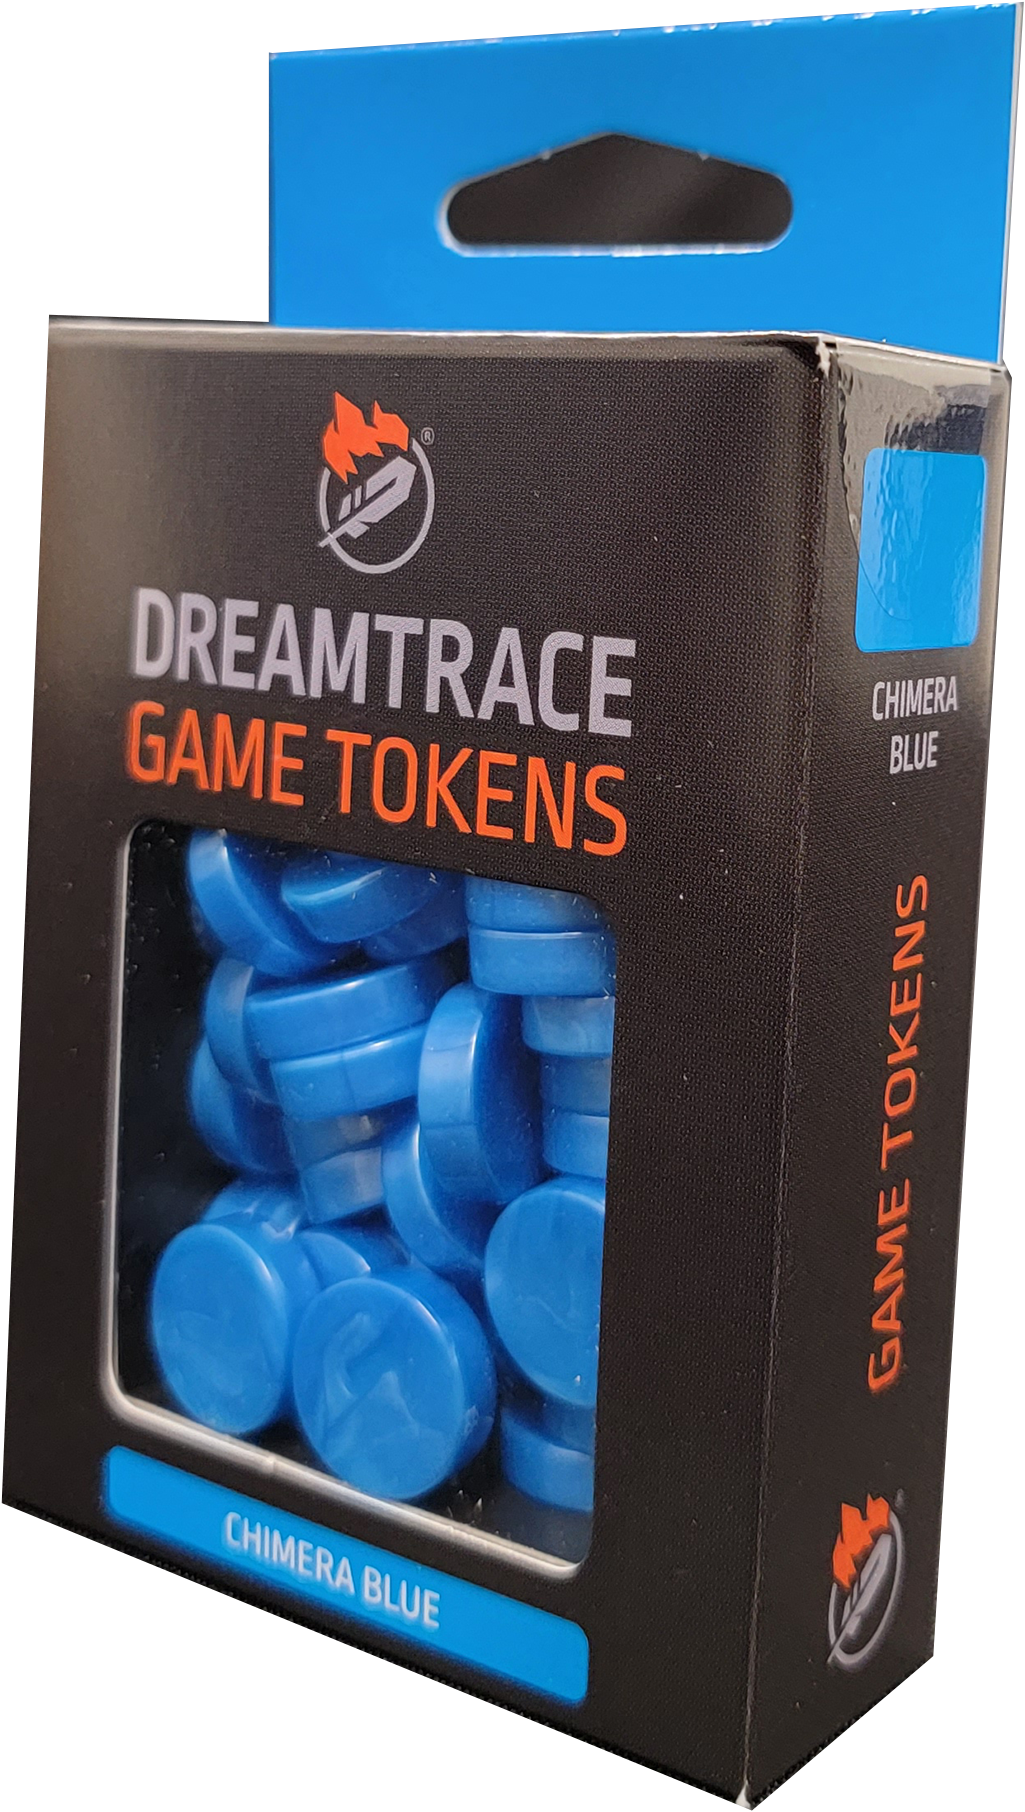 Dreamtrace Gaming Tokens: Chimera Blue 